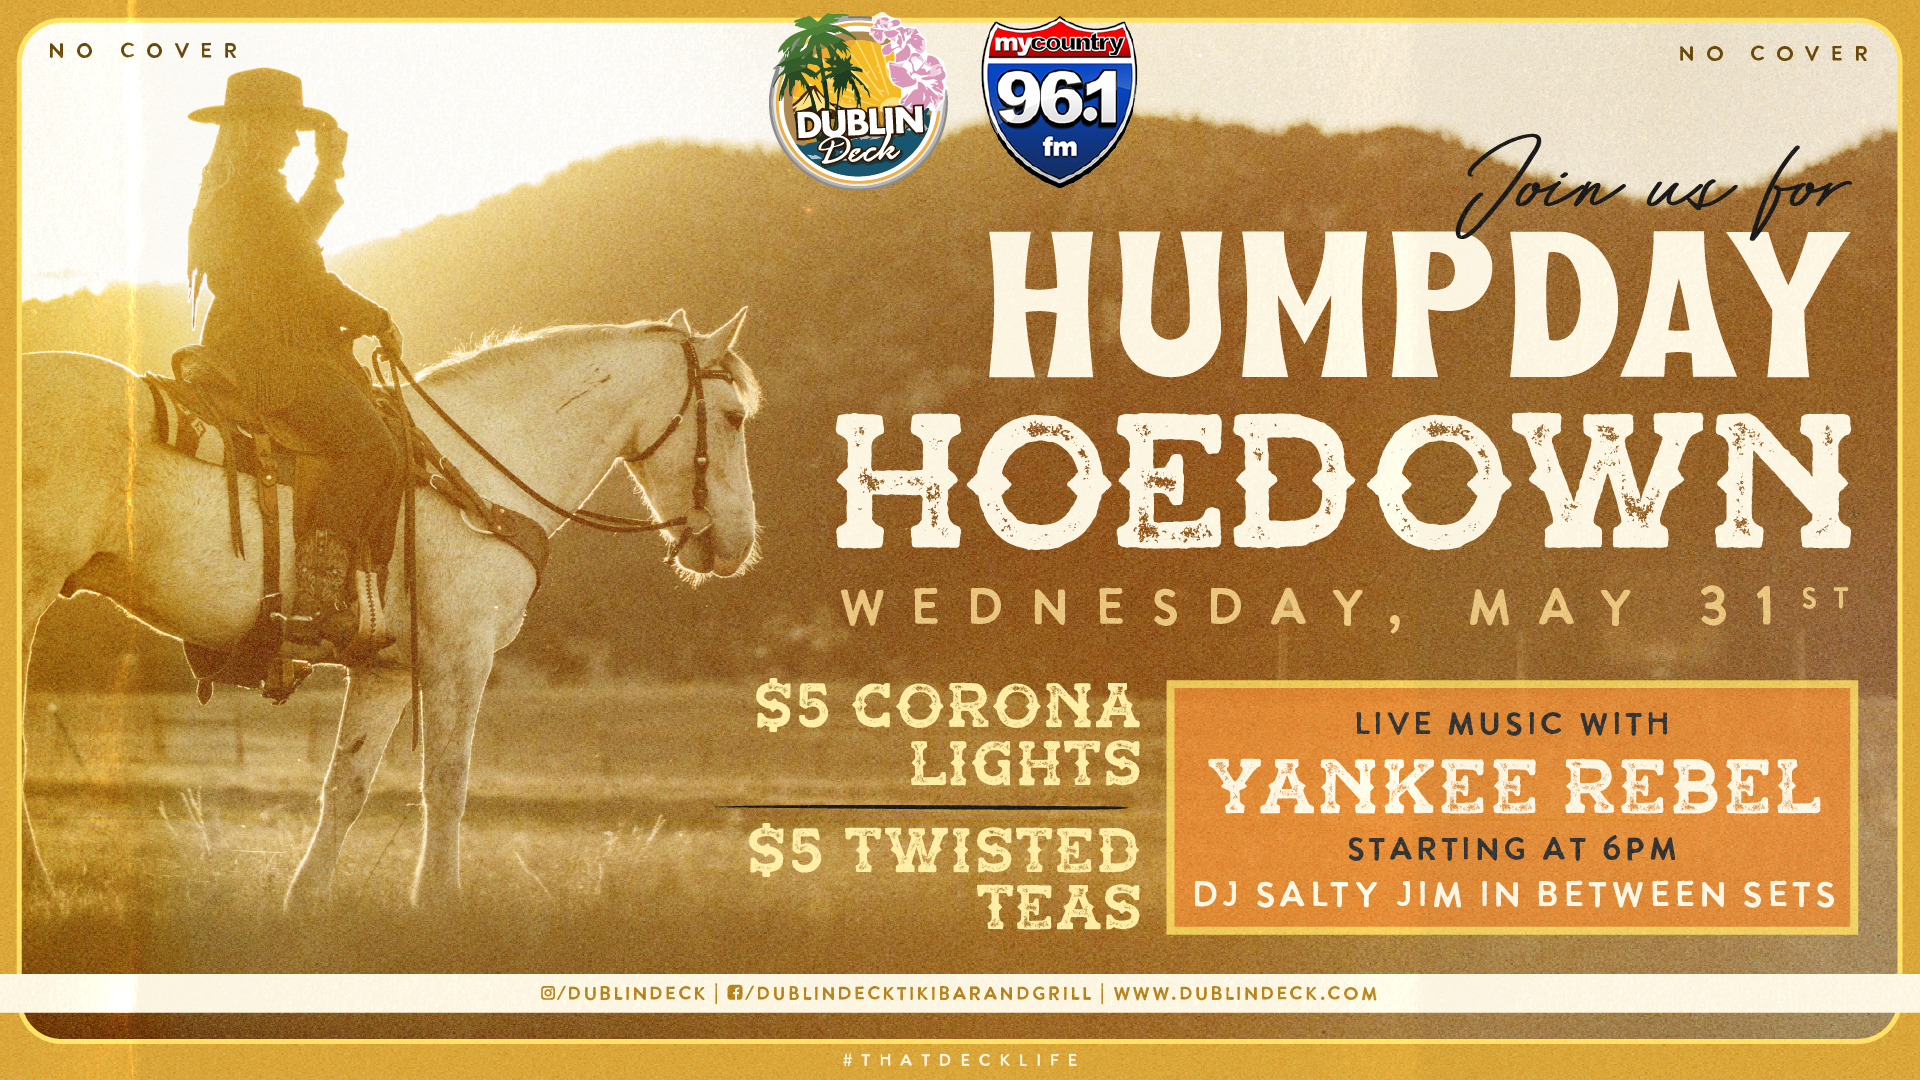 Come on down to Dublin Deck for Humpday Hoedown with Yankee Rebel! Music begins at 6PM